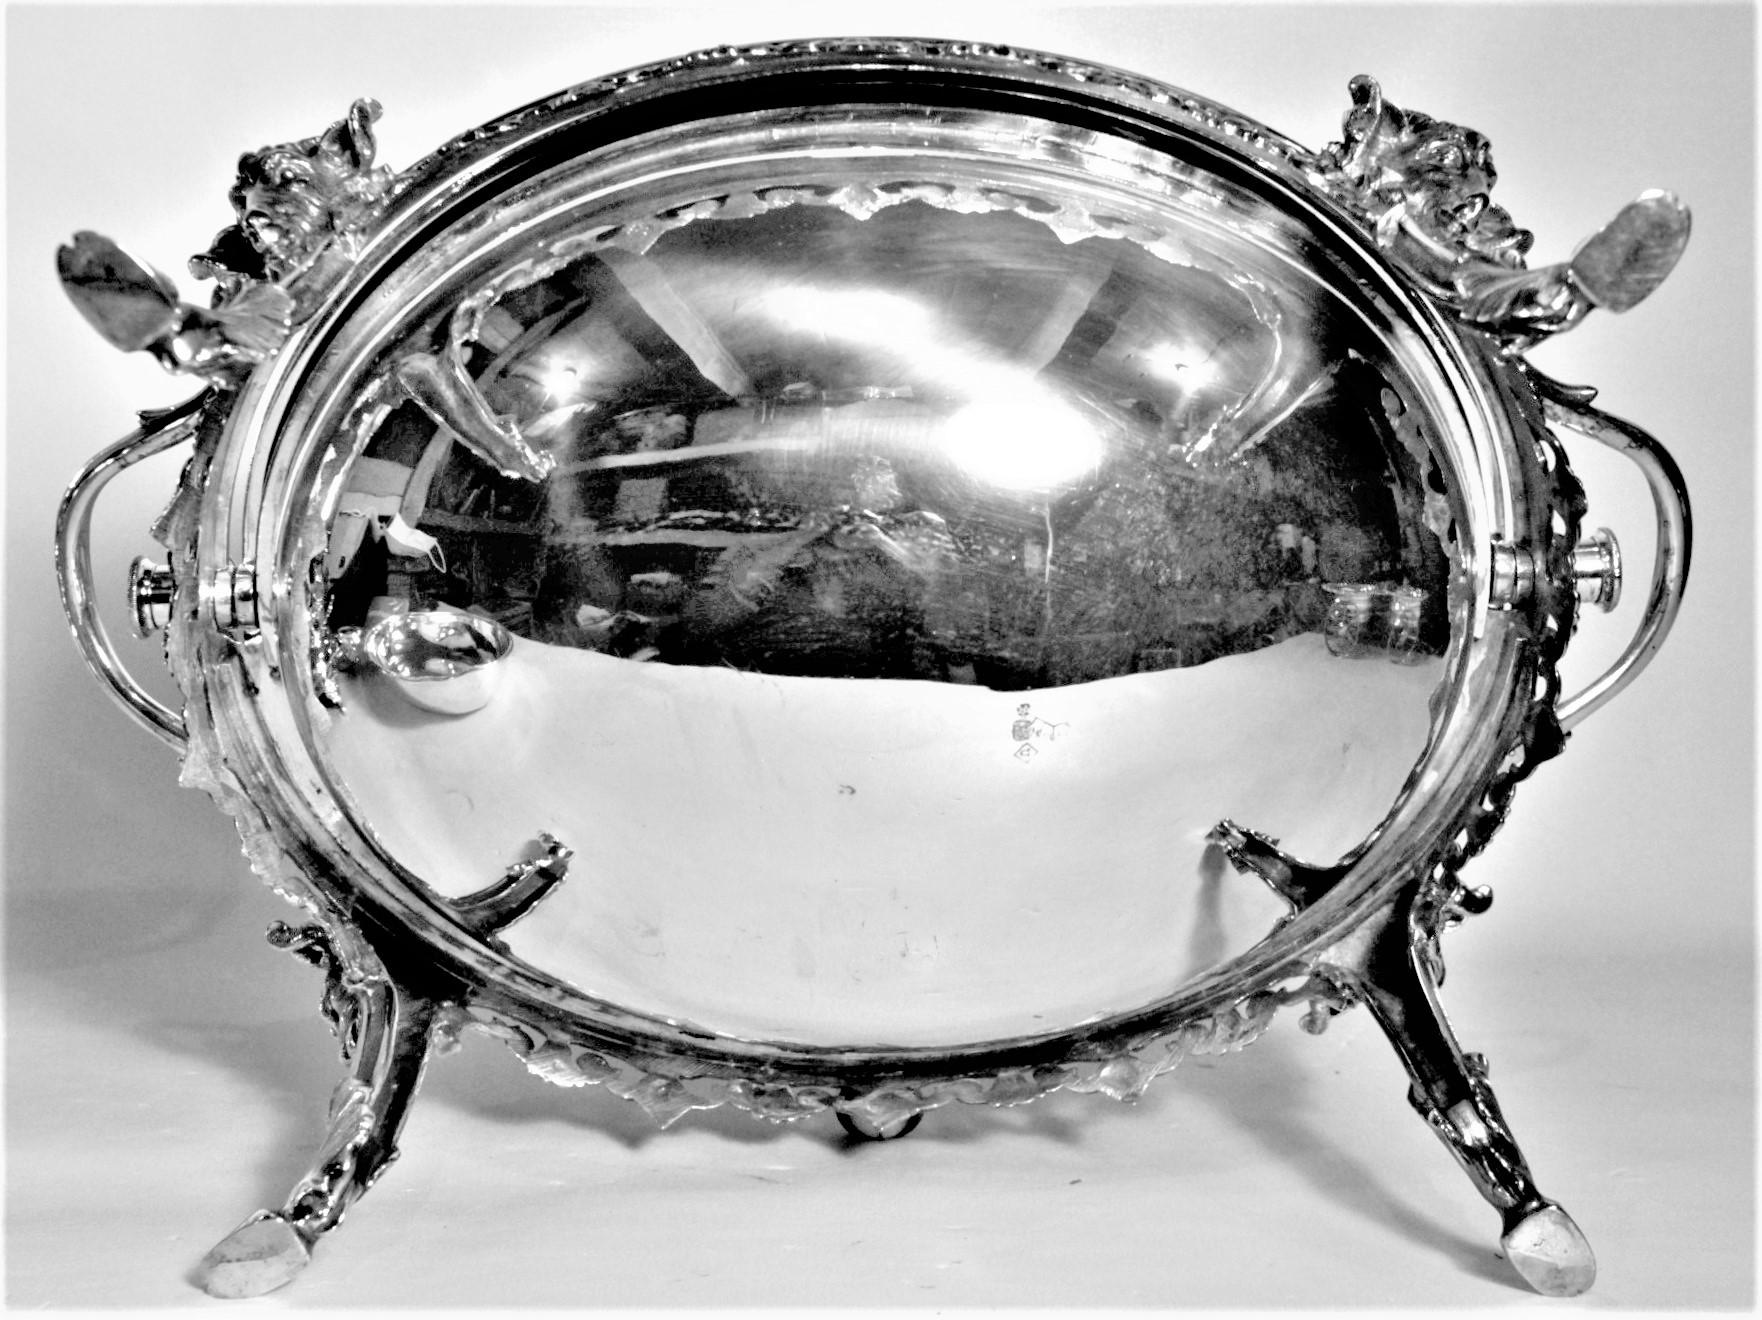 Antique English Silver Plated Revolving Breakfast Dome with Figural Ram Accents For Sale 6